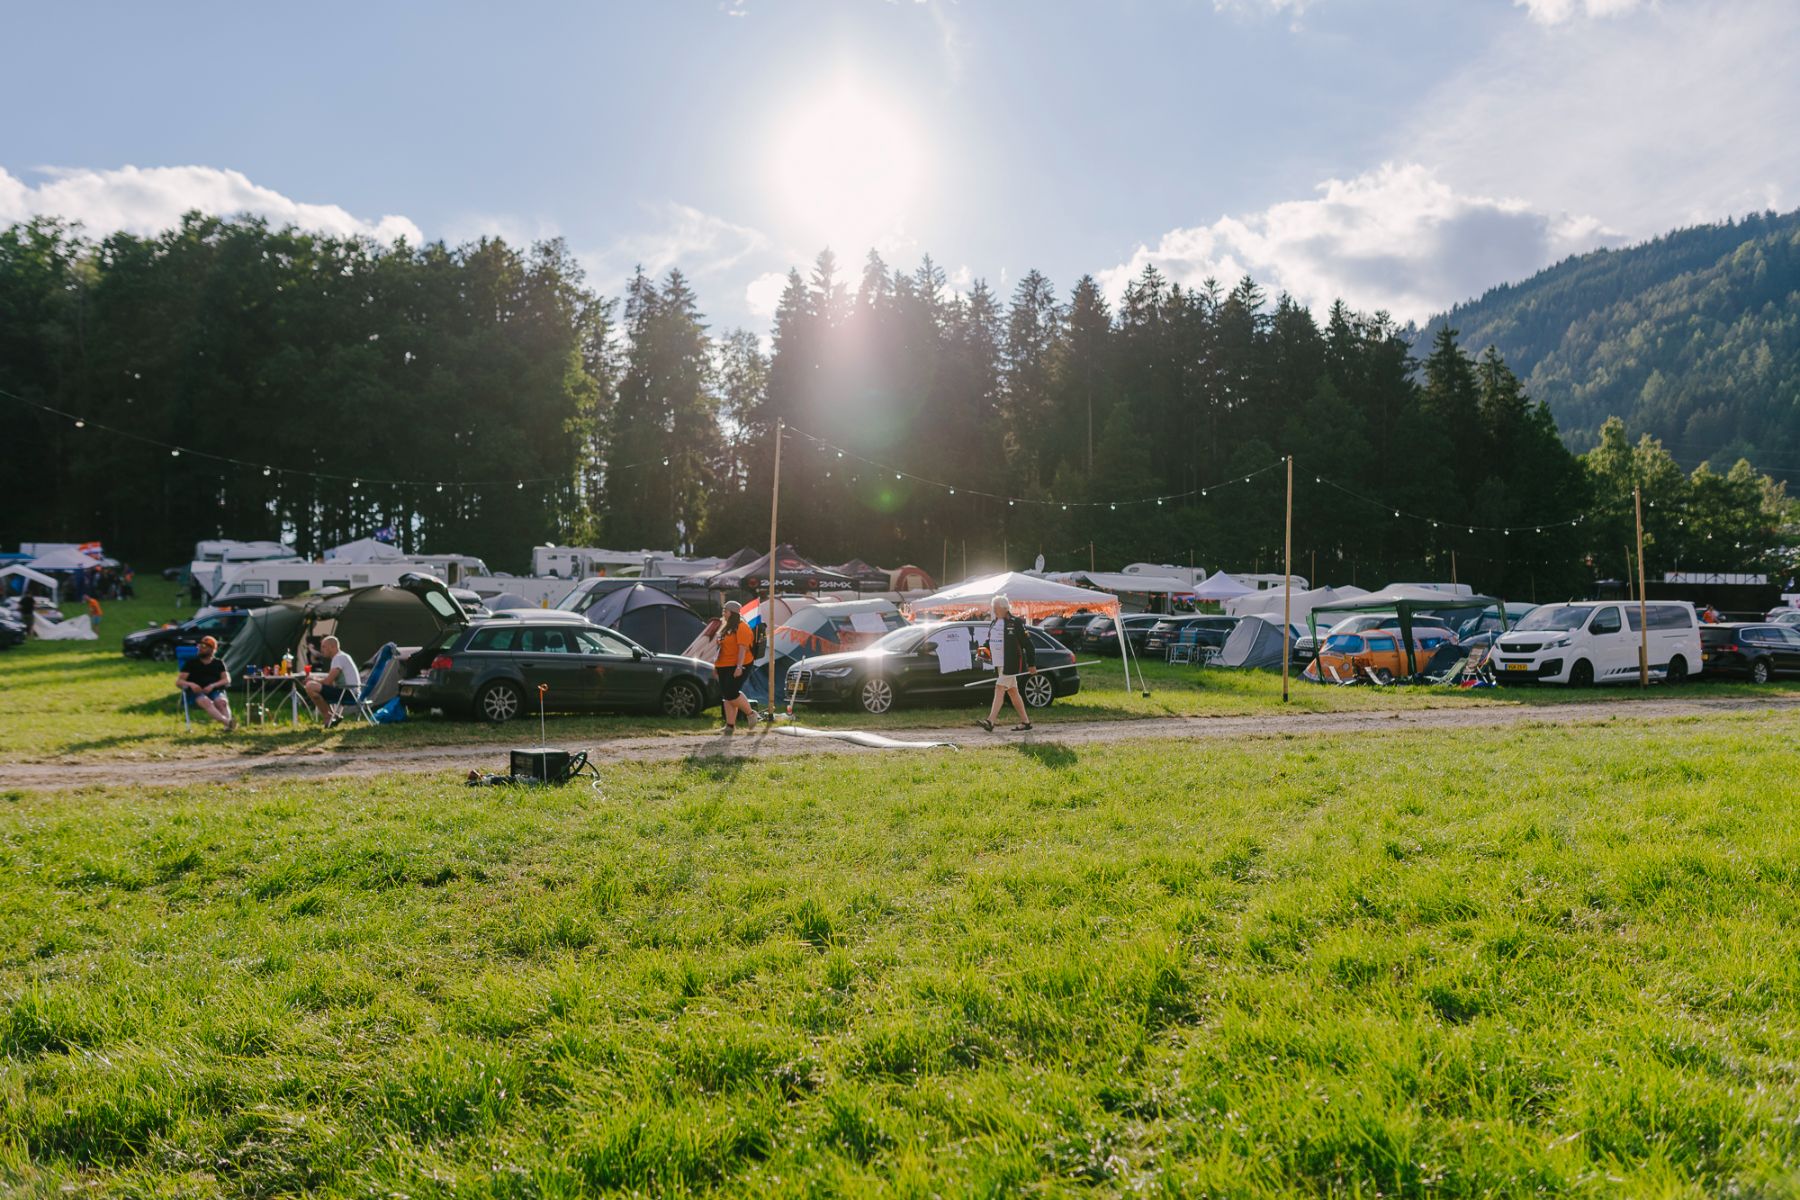 Pitches on the Green Area with tents and cars, green meadow